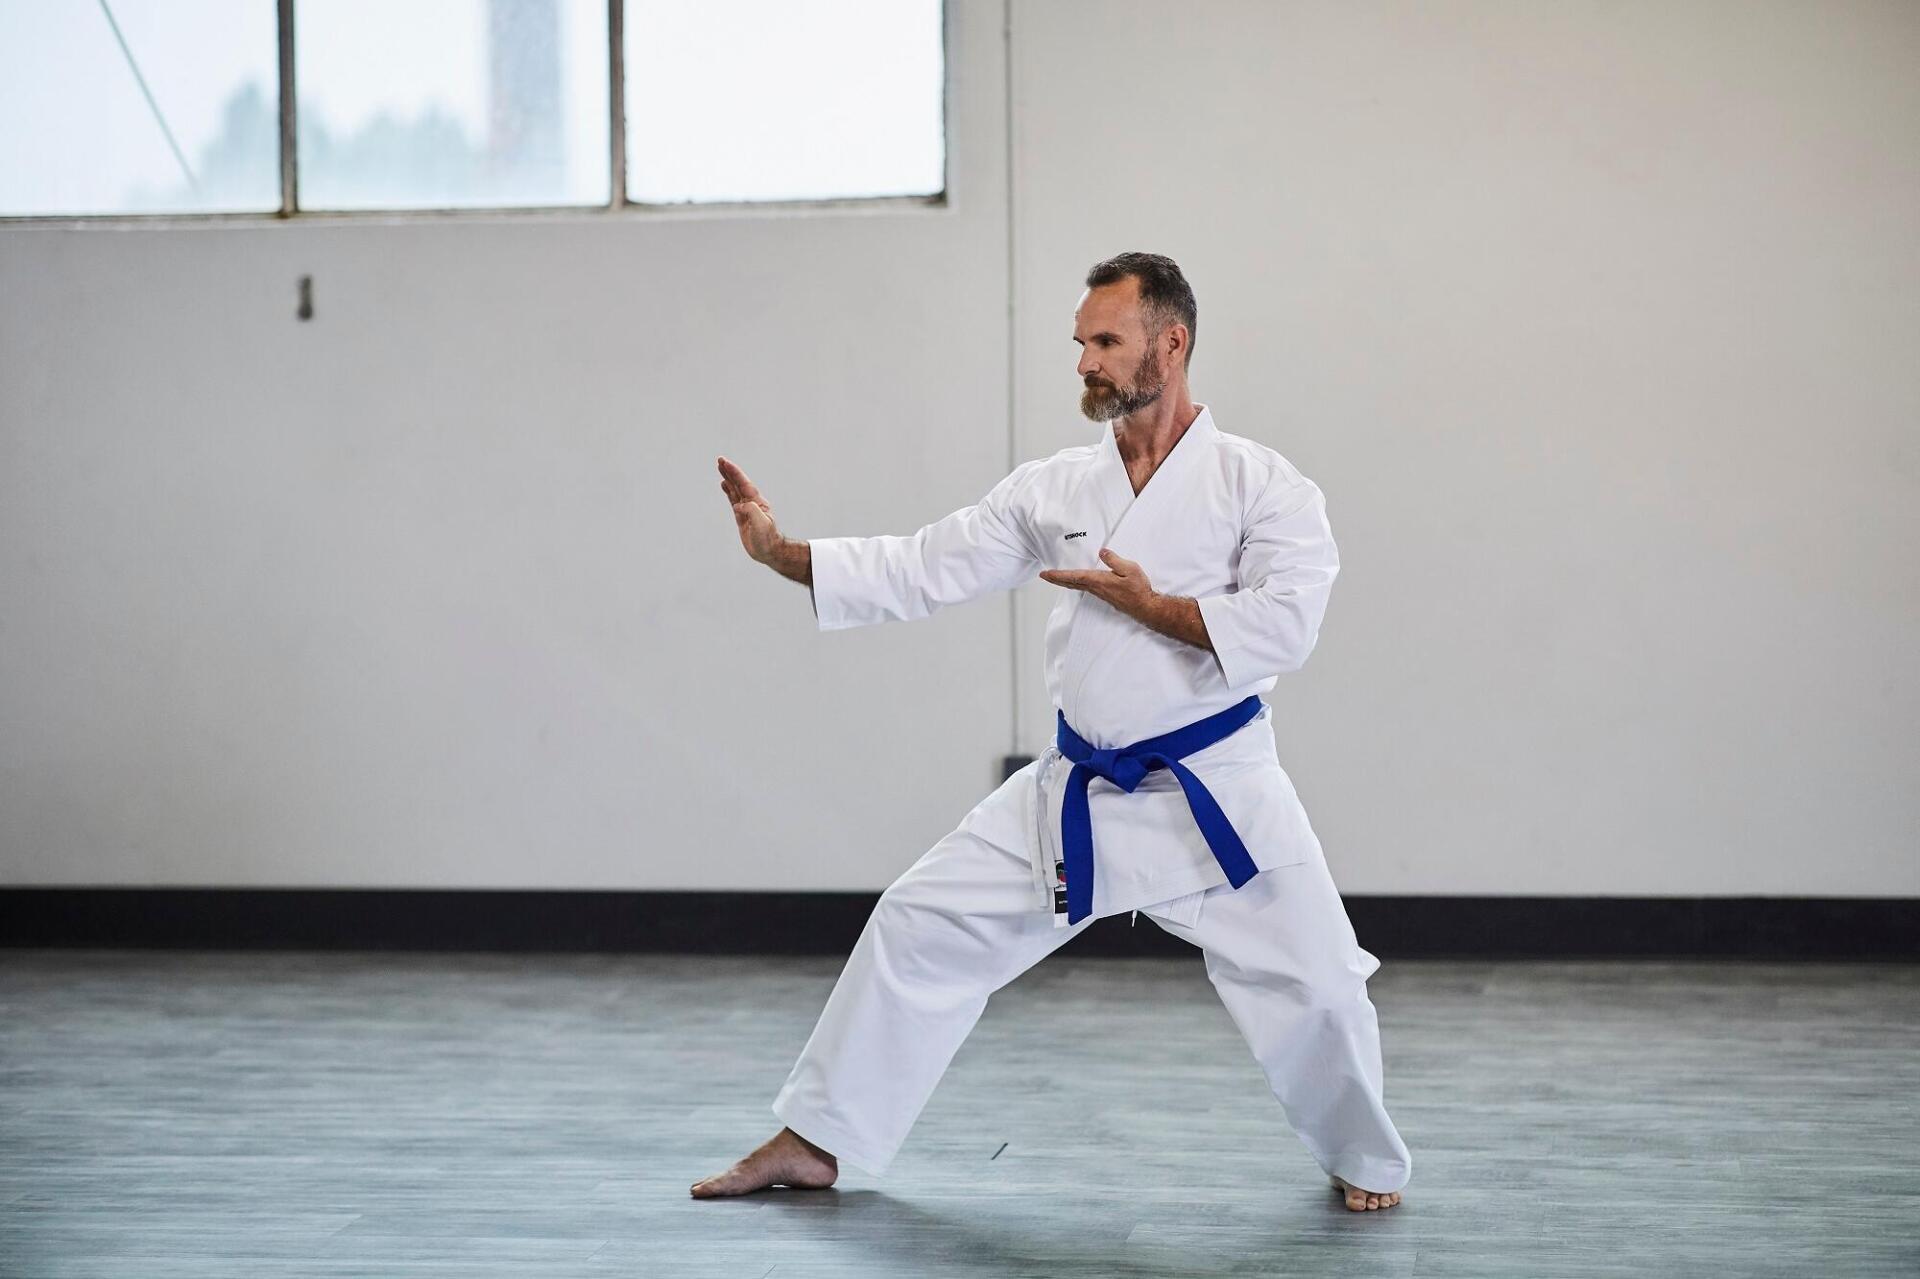 Ancient Japanese Martial Art Karate Strikes For First Time At